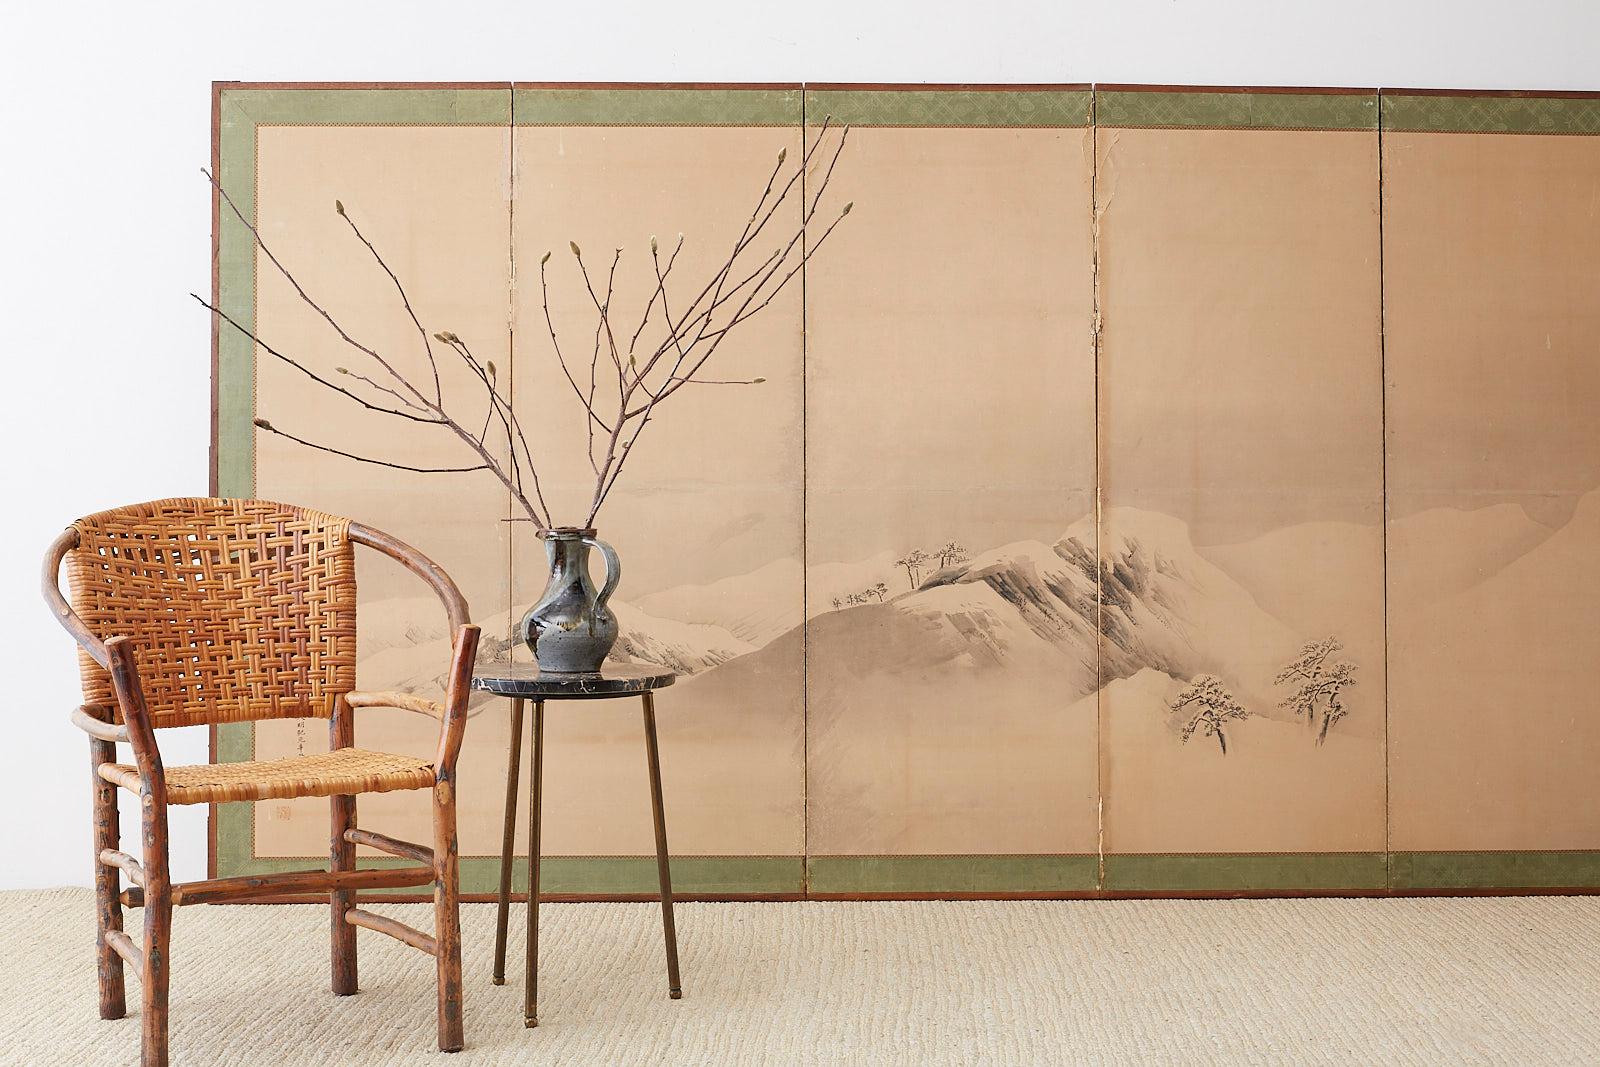 Monumental Japanese six-panel Meiji period screen depicting a serene snowscape mountain scene. Ink on paper made in the Maruyama school style late 19th-early 20th century. Bearing an inscribed date: Tenmei 1st year (1781) autumn. Signature reads